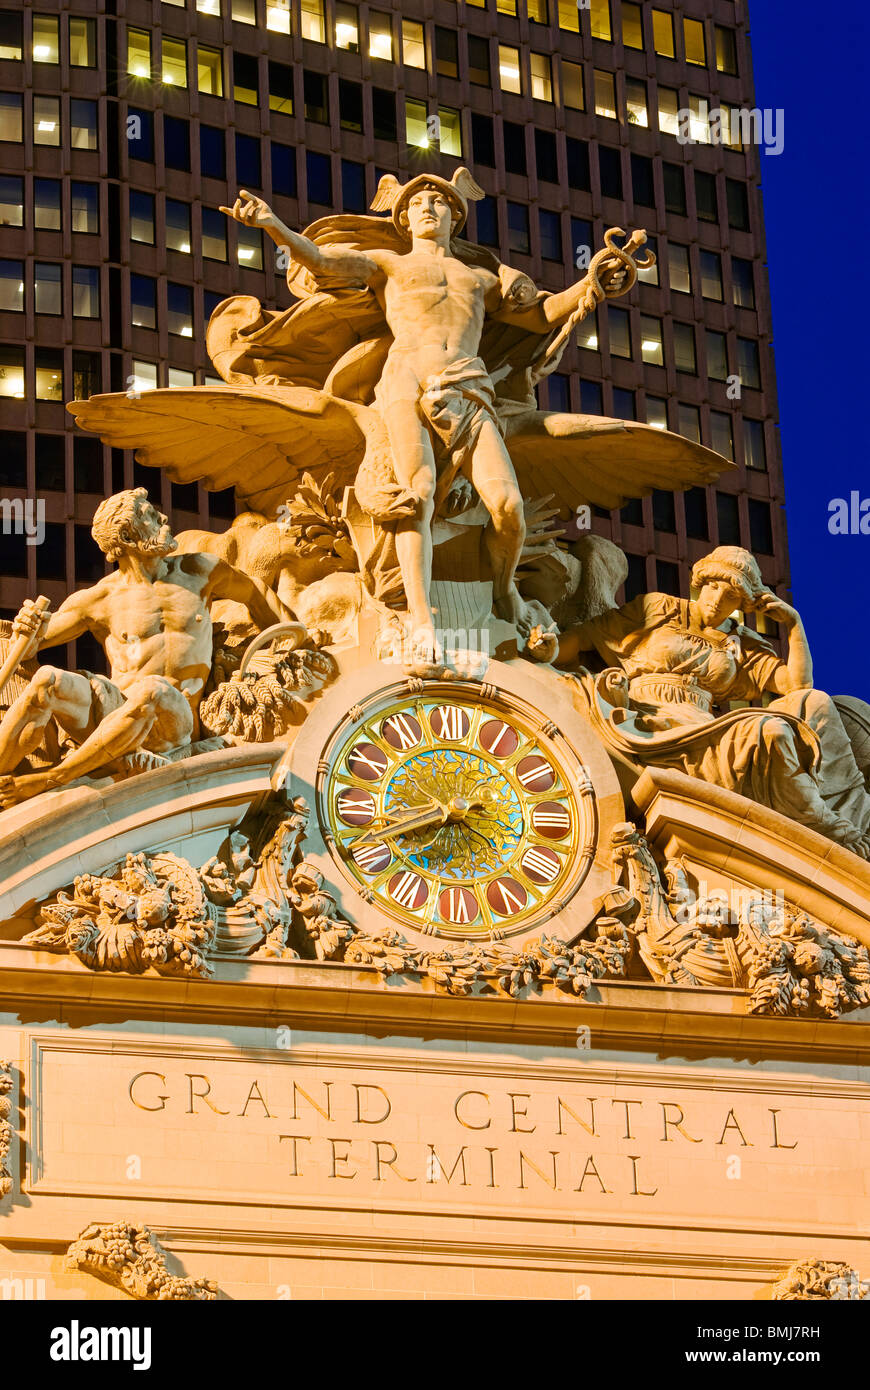 Beaux Arts Statue des Merkur, Grand Central Terminal in New York City. Stockfoto